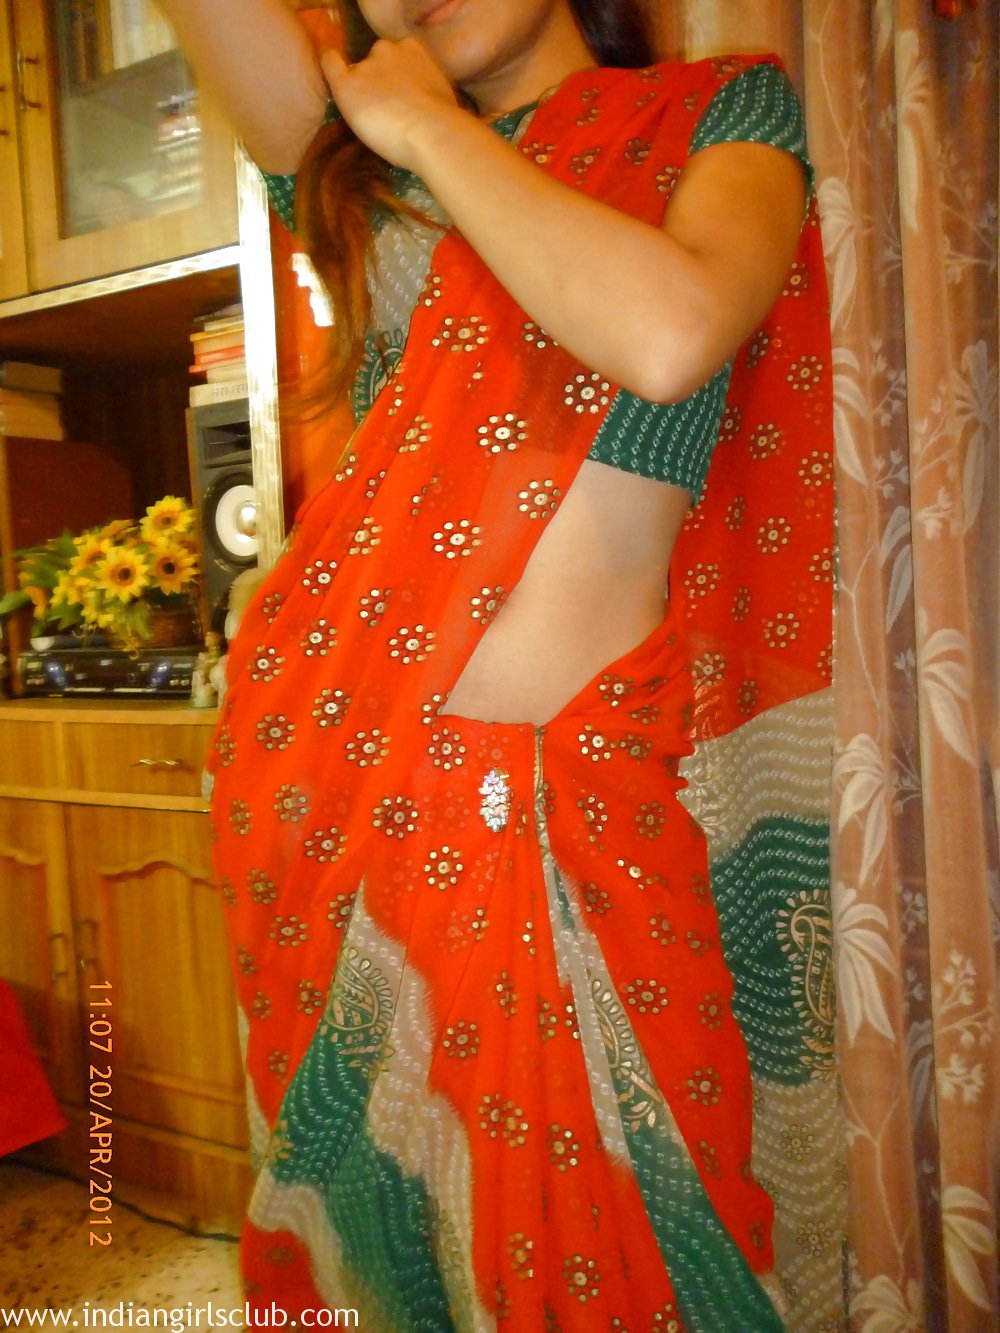 Sex Photos Of Indian Wife In Saree Getting Naked In Bedroom pic pic